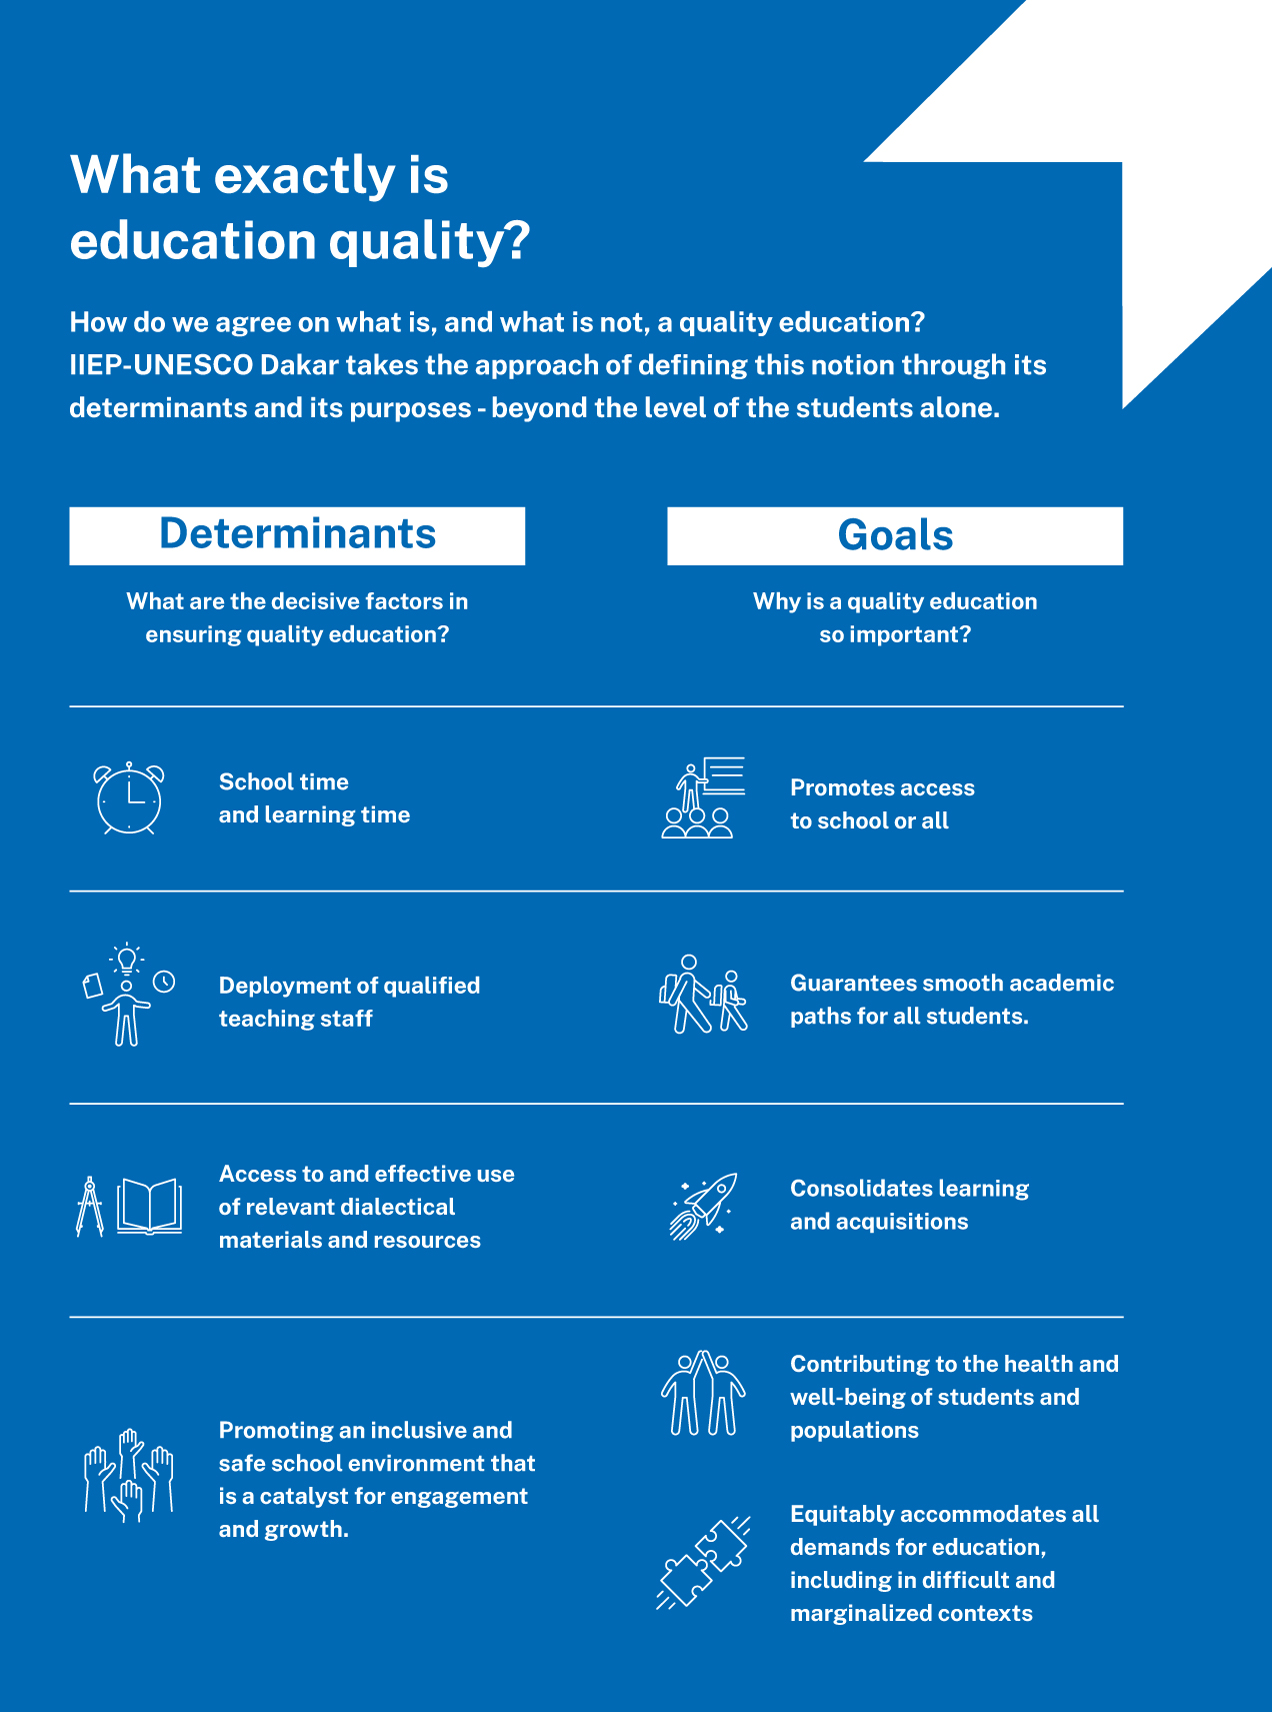 What exactly is education quality ?